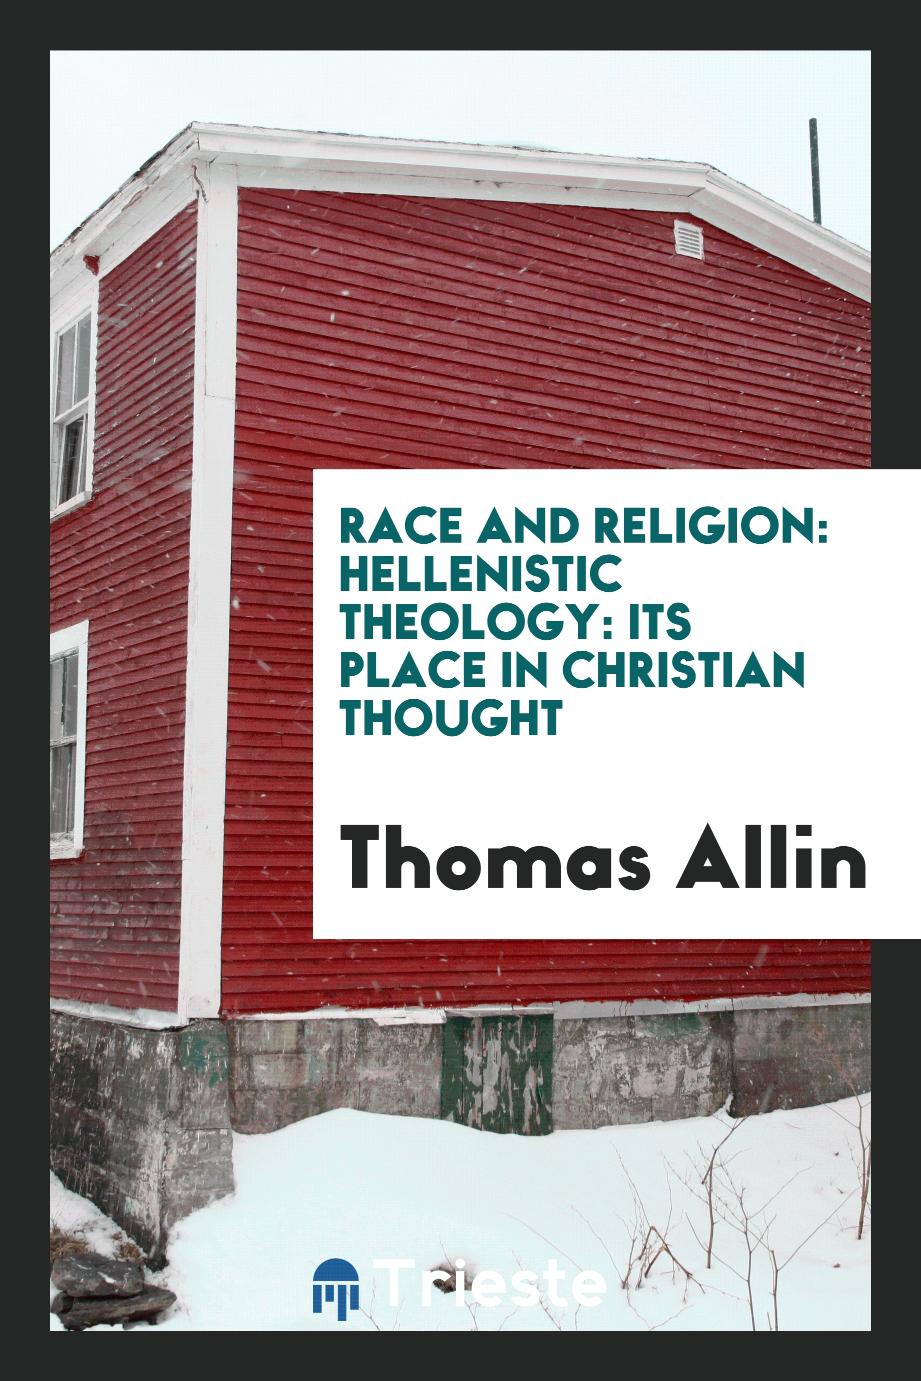 Race and Religion: Hellenistic Theology: Its Place in Christian Thought